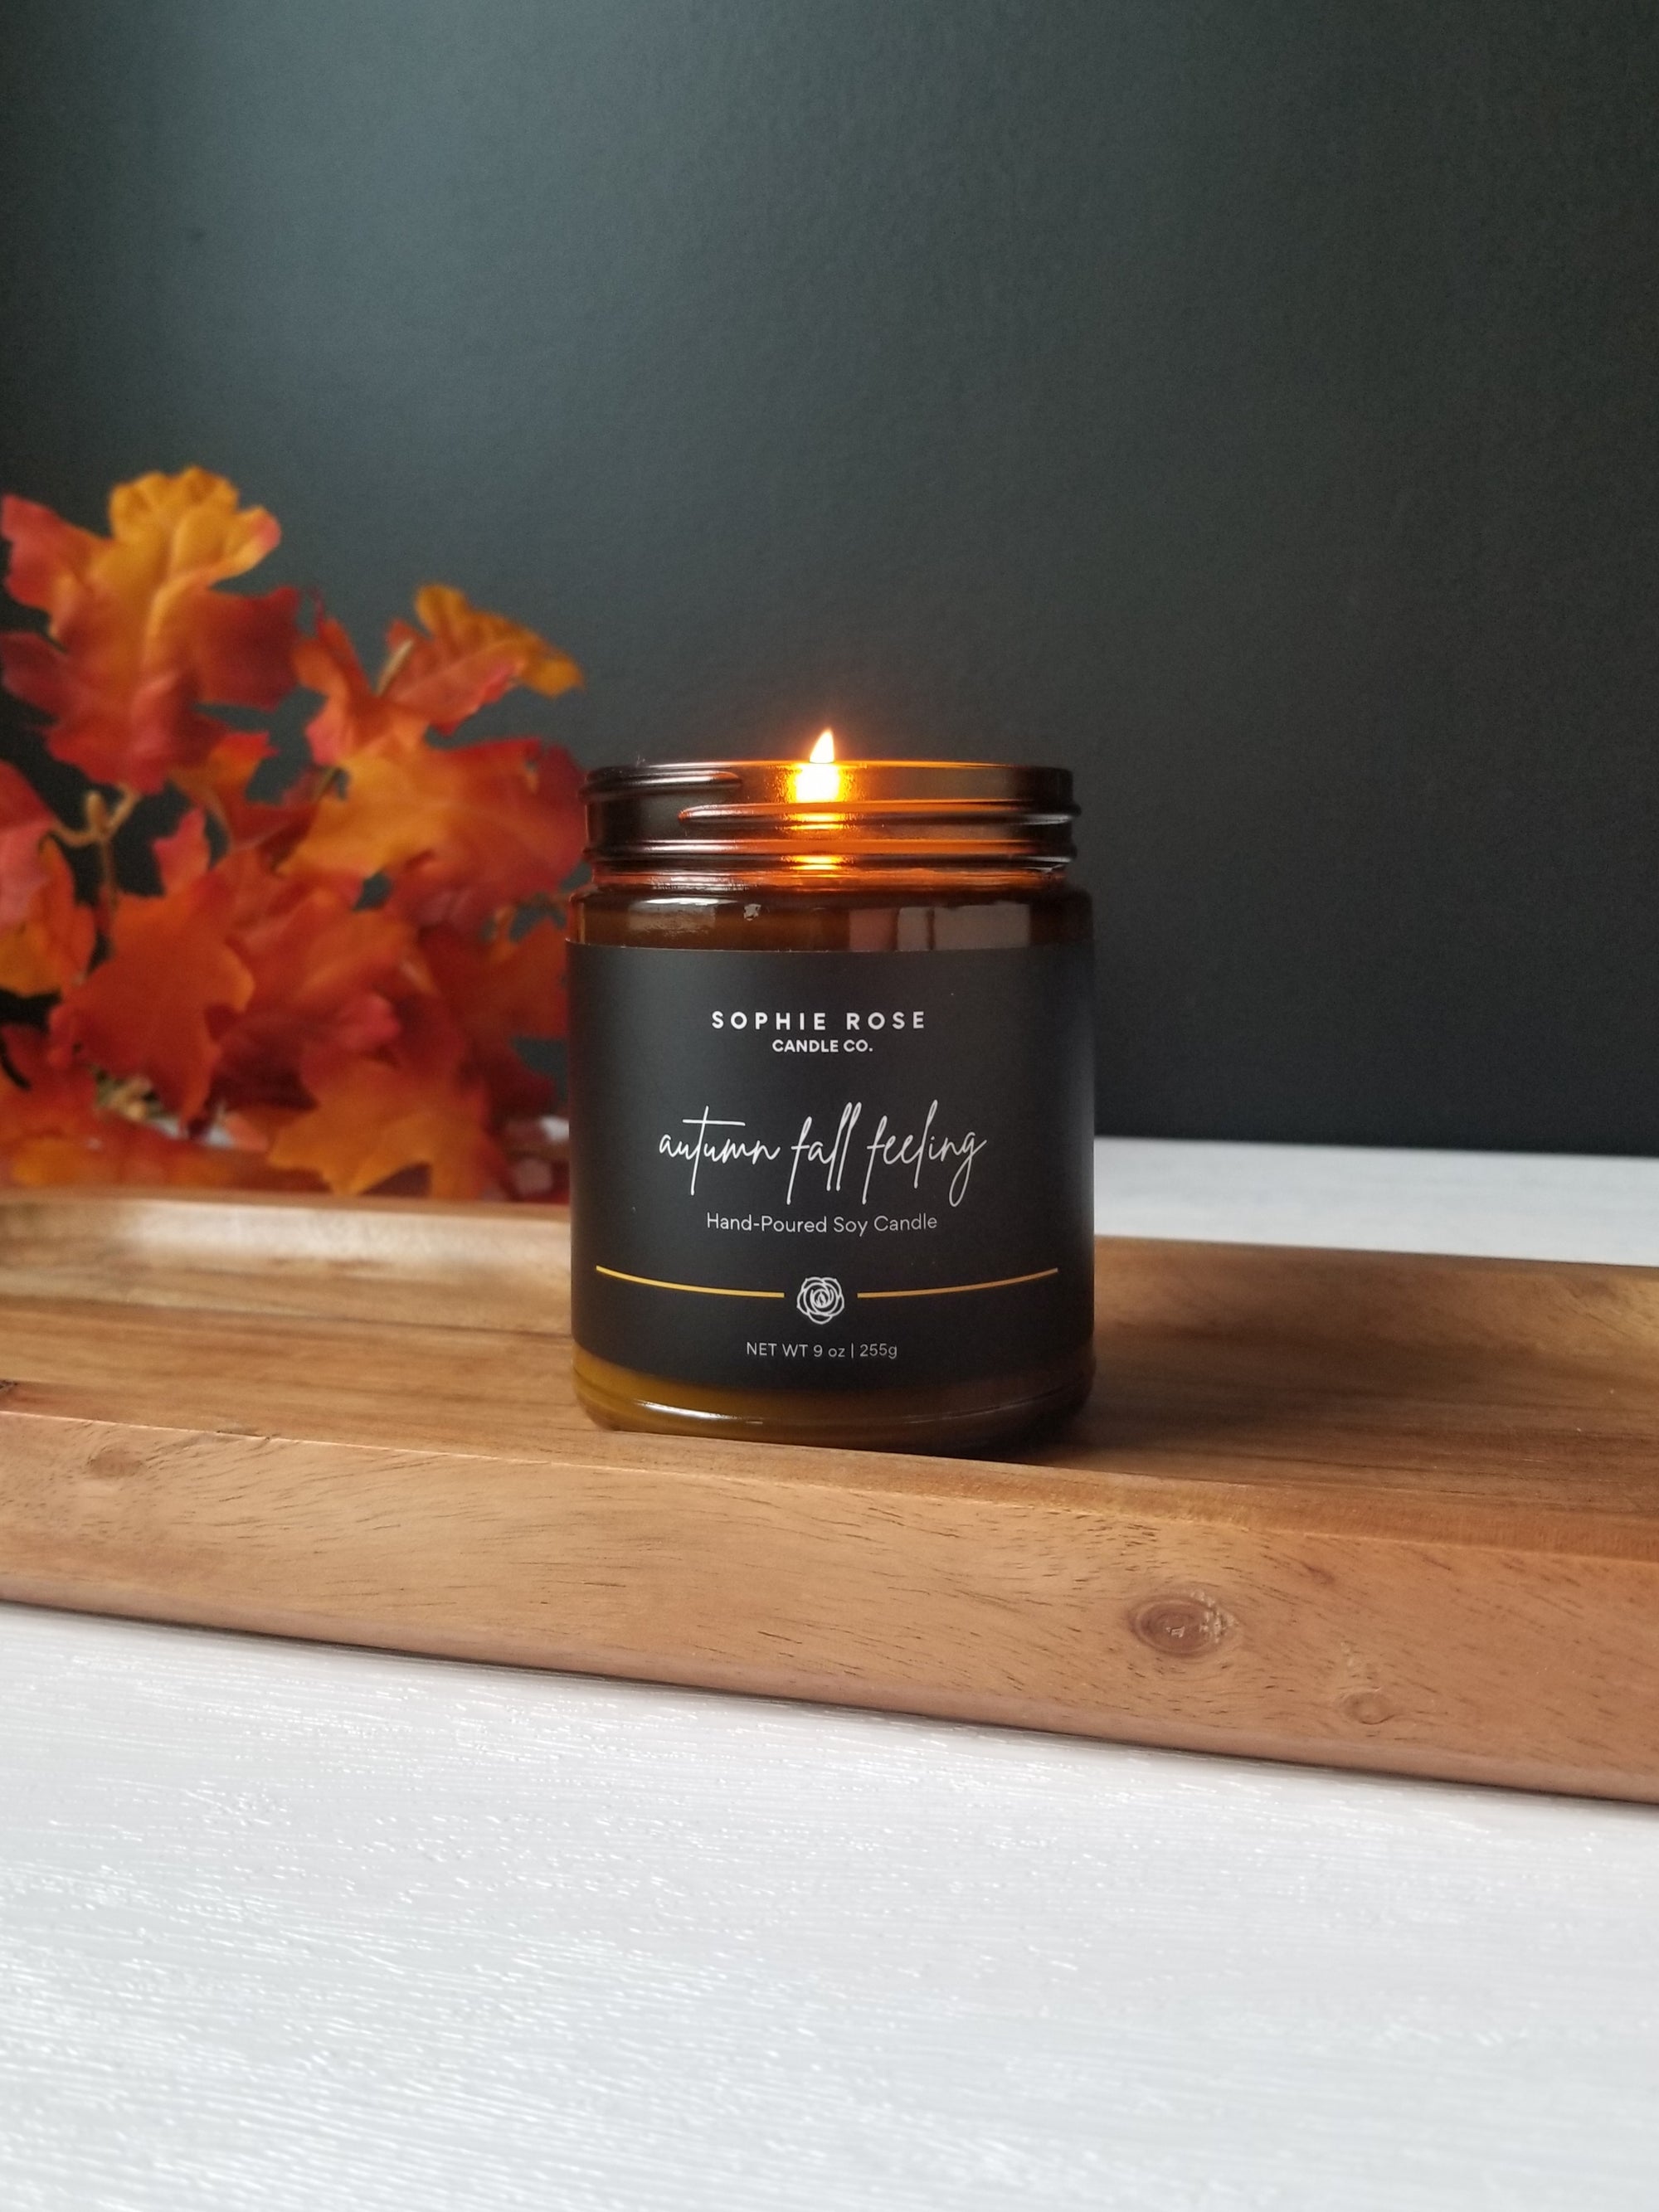 Autumn Fall Feeling Soy Candle by Sophie Rose Candle Co.